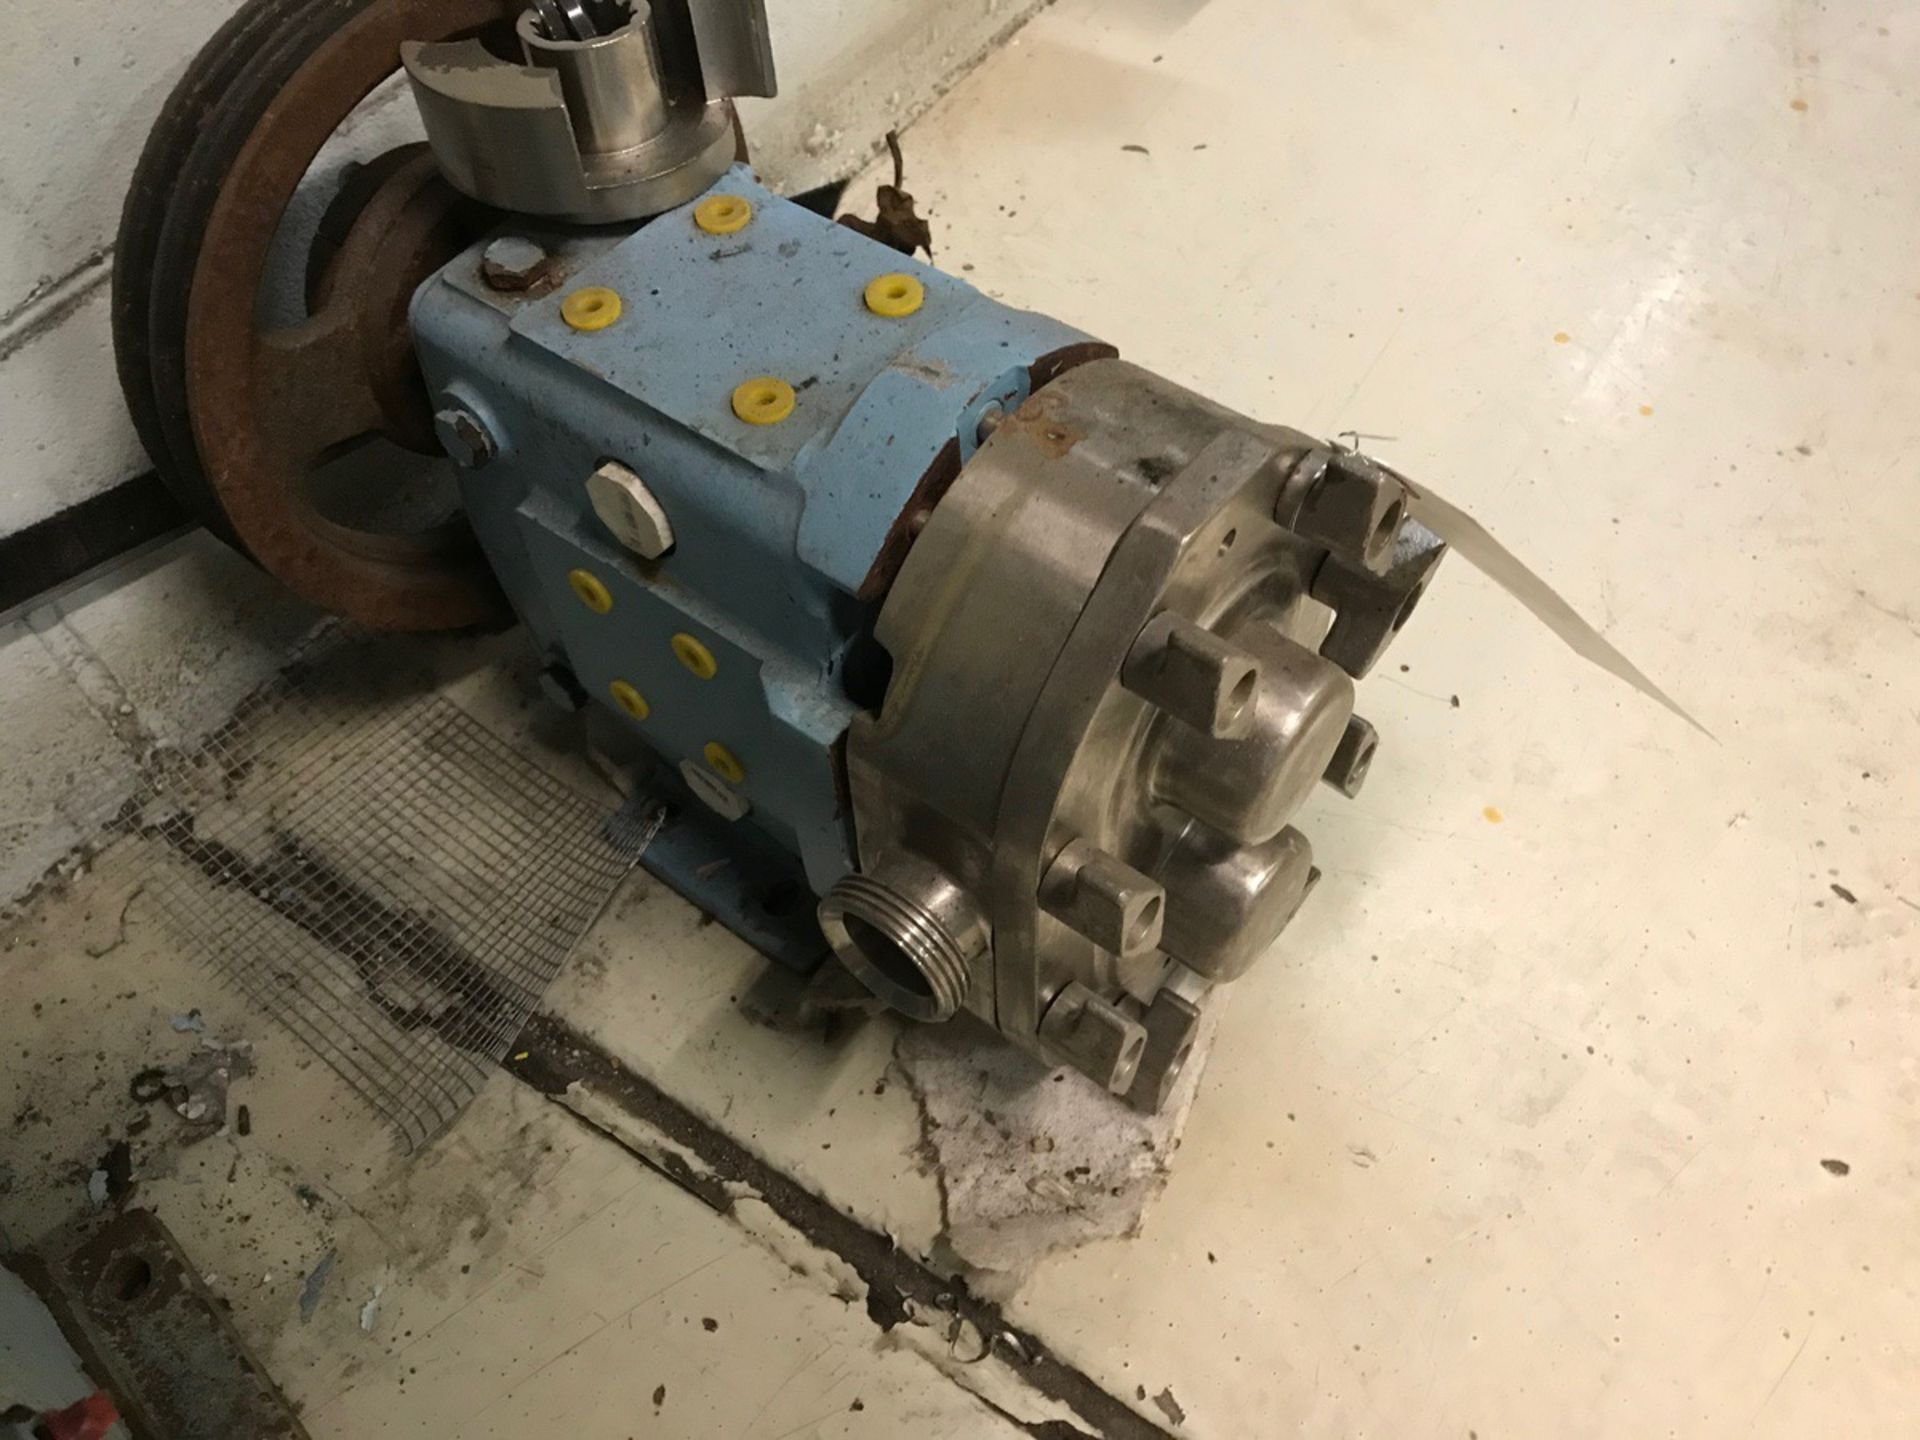 WAUKESHA 030 POSITIVE DISPLACEMENT PUMP, 1.5" INLET, 1.5" OUTLET, S/N: 203498_97 | Rig Fee $25 - Image 2 of 2